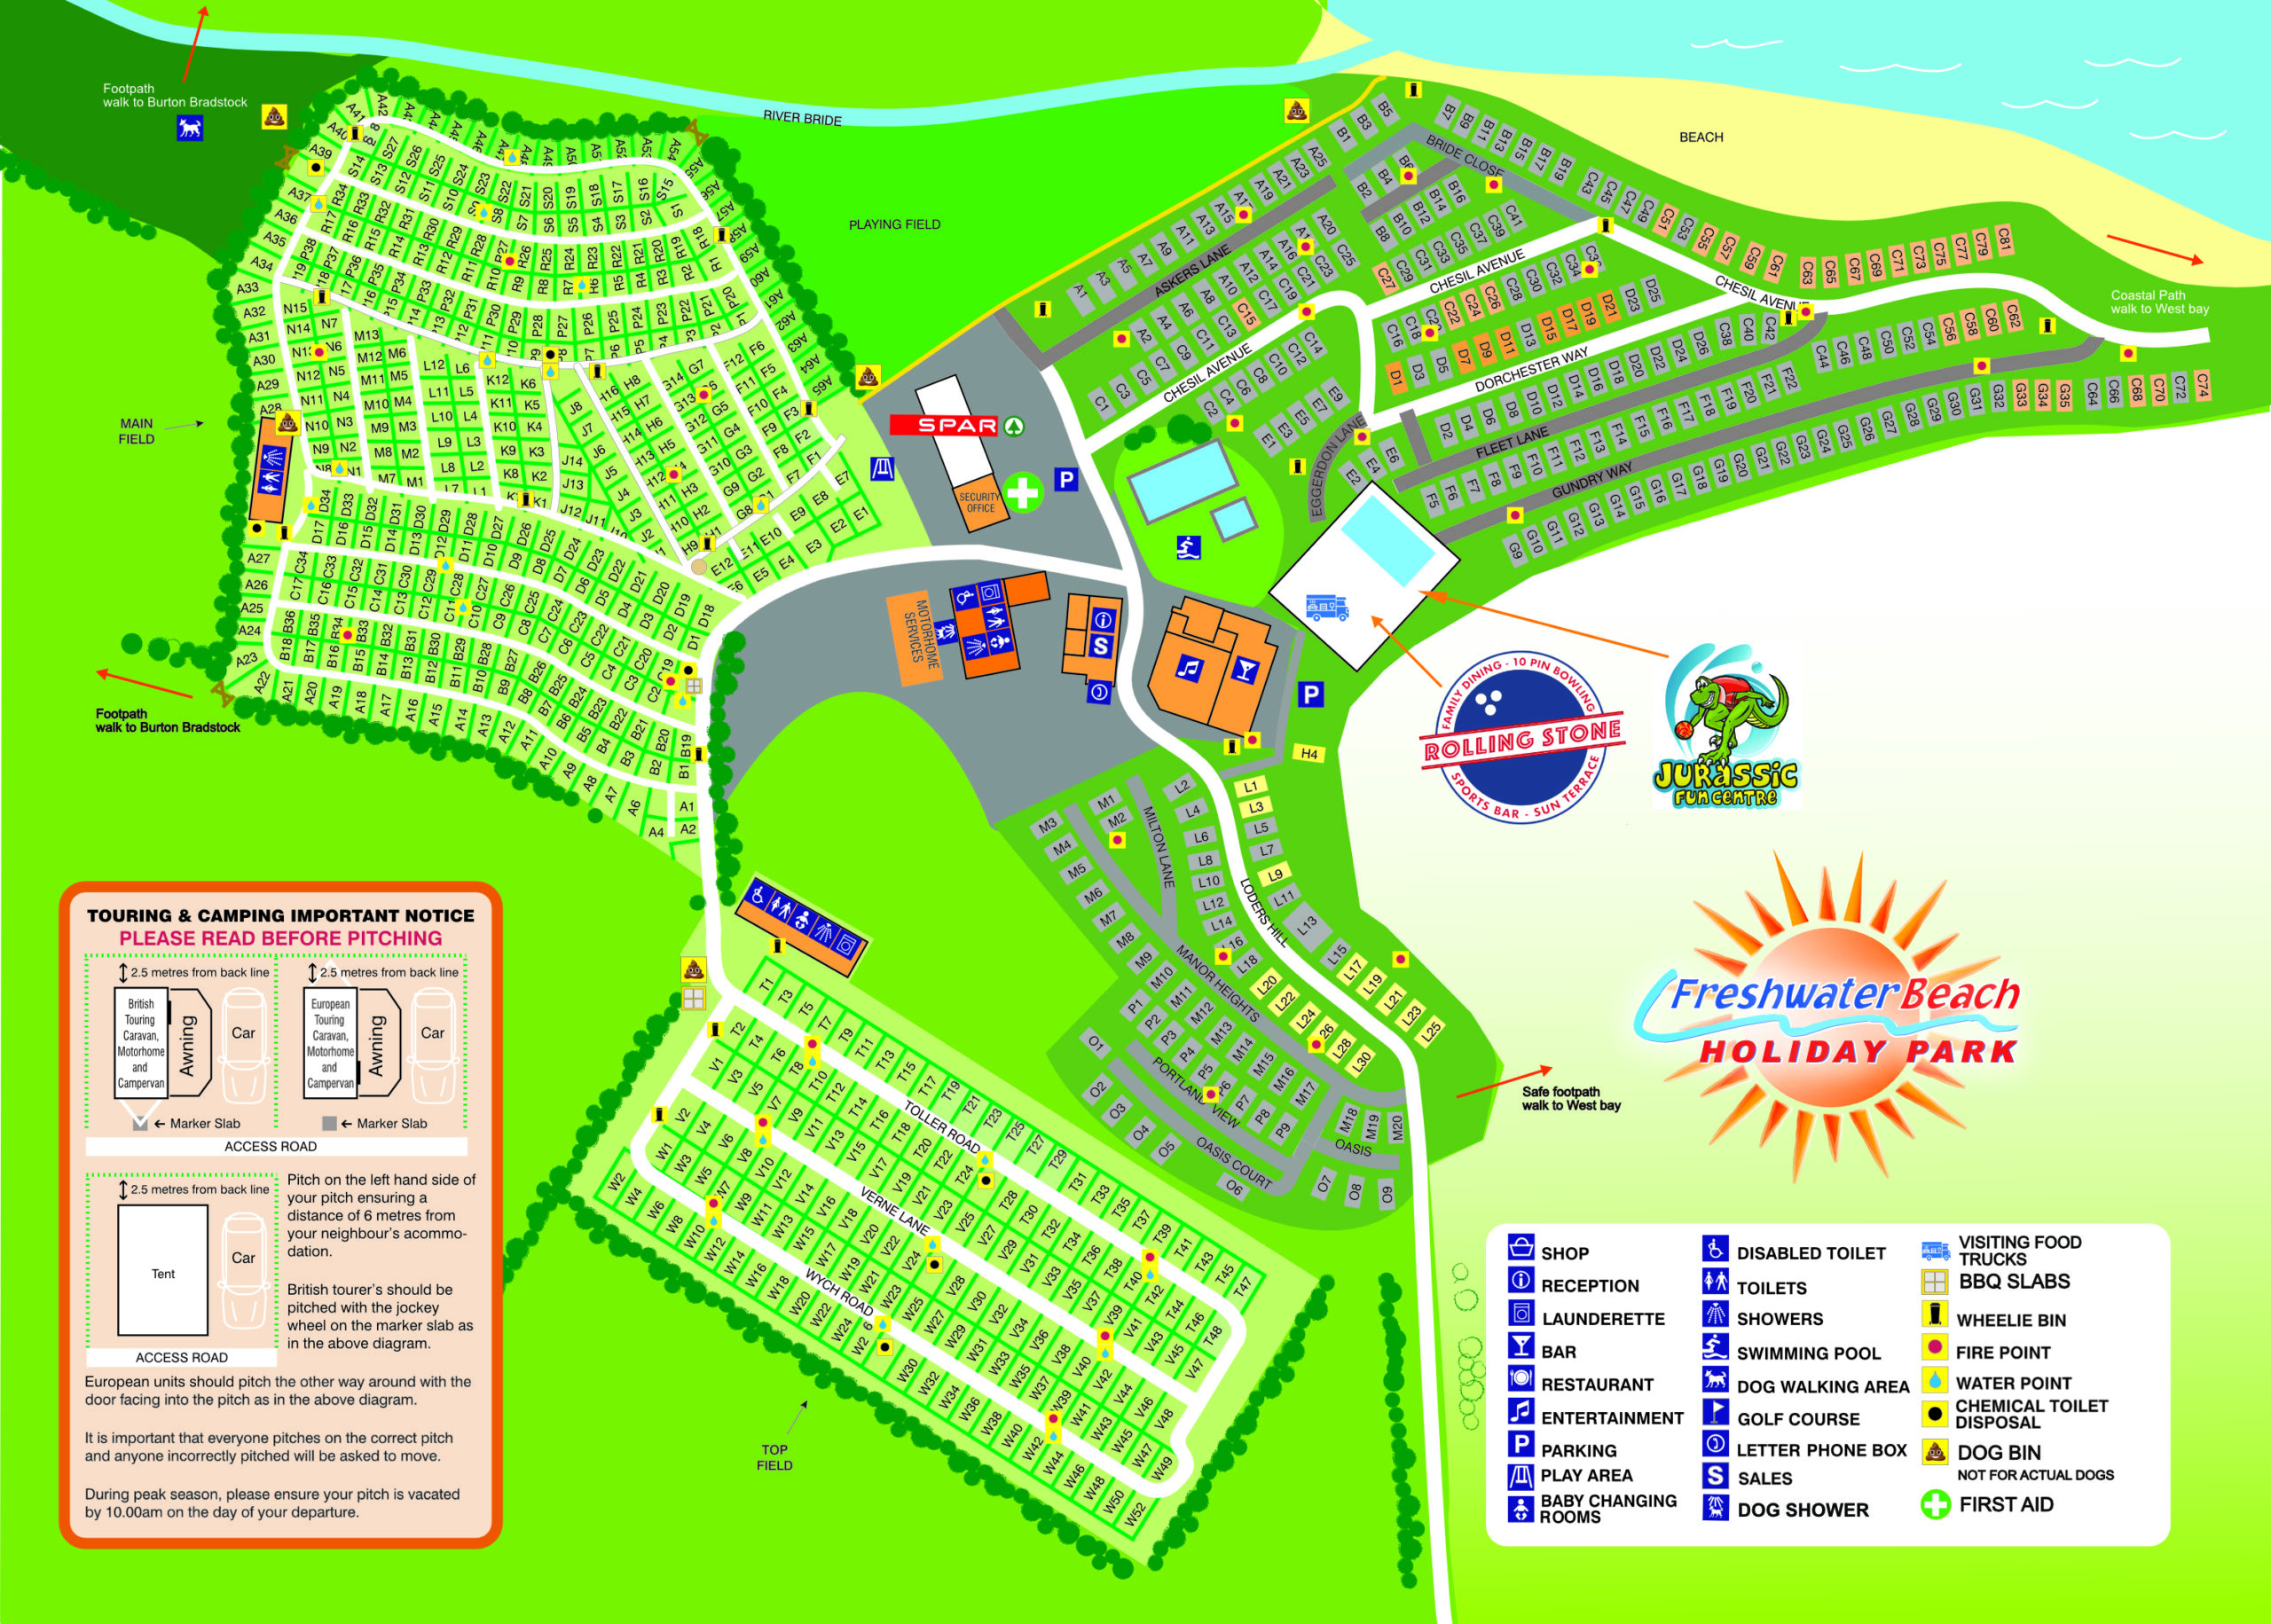 Freshwater Beach Holiday park map